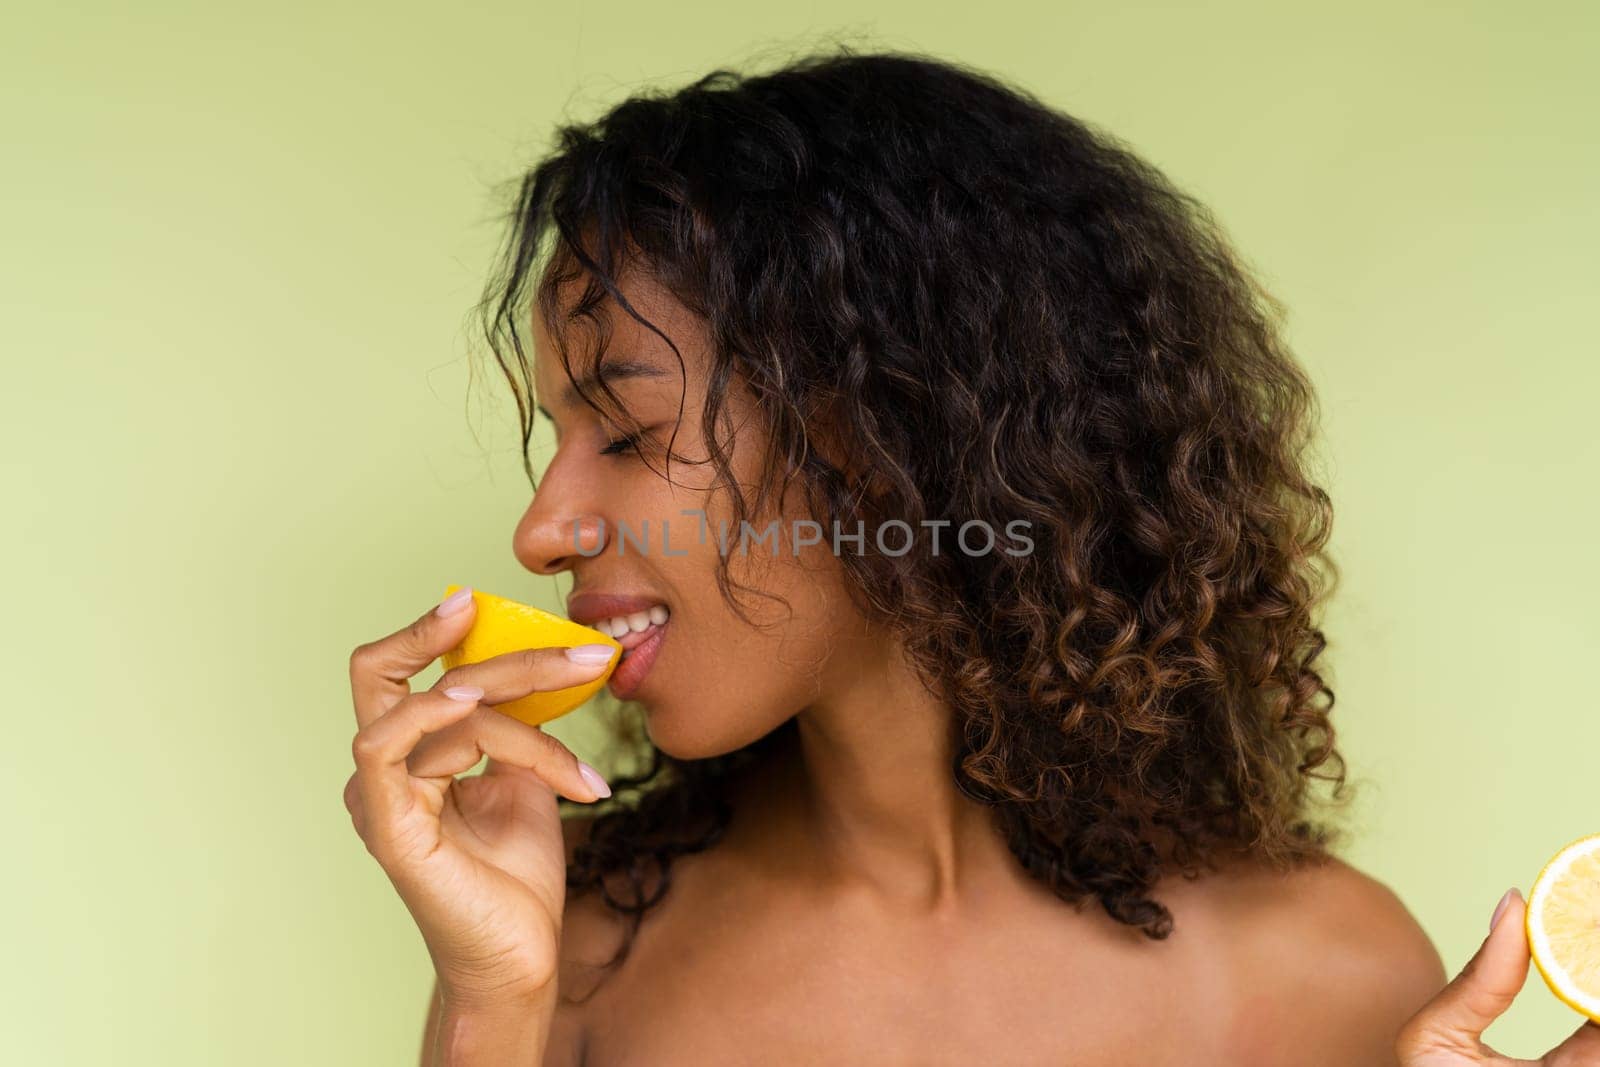 Beauty portrait of young topless woman with bare shoulders on green background with perfect skin and natural makeup holds citrus lemons